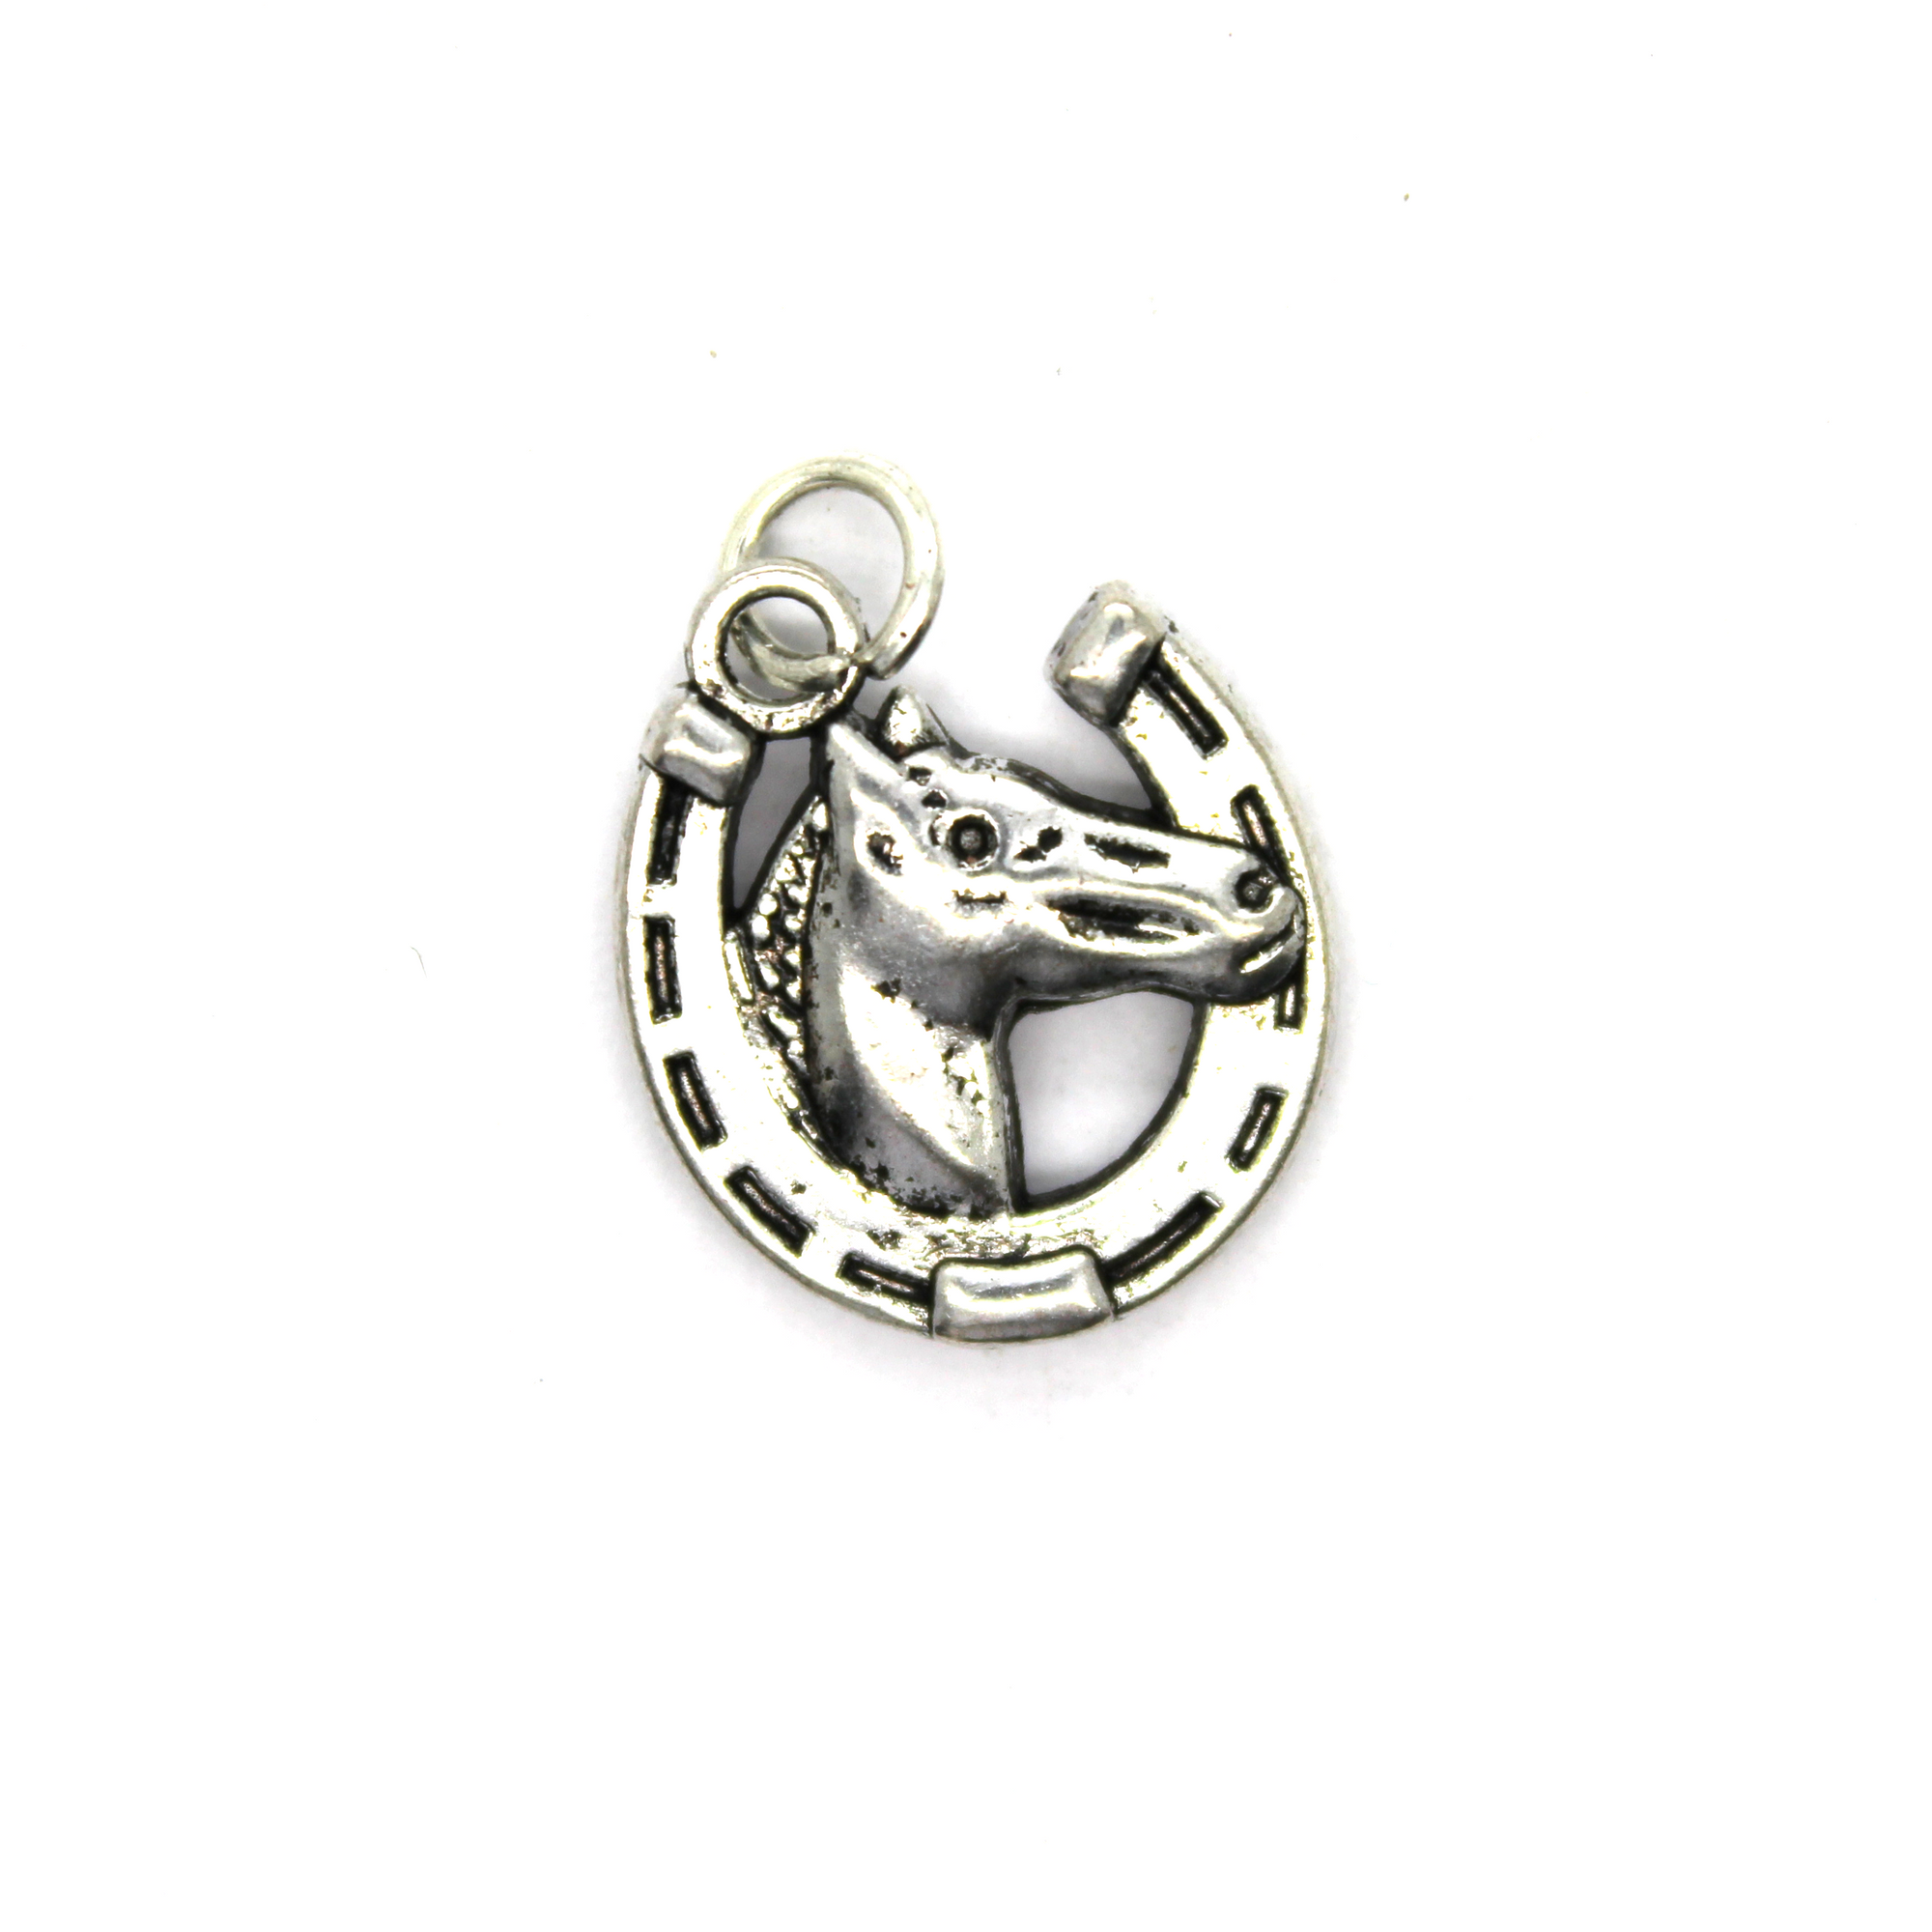 Charms, Horseshoe & Horse, Silver, Alloy, 16mm X 17mm, Sold Per pkg of 3